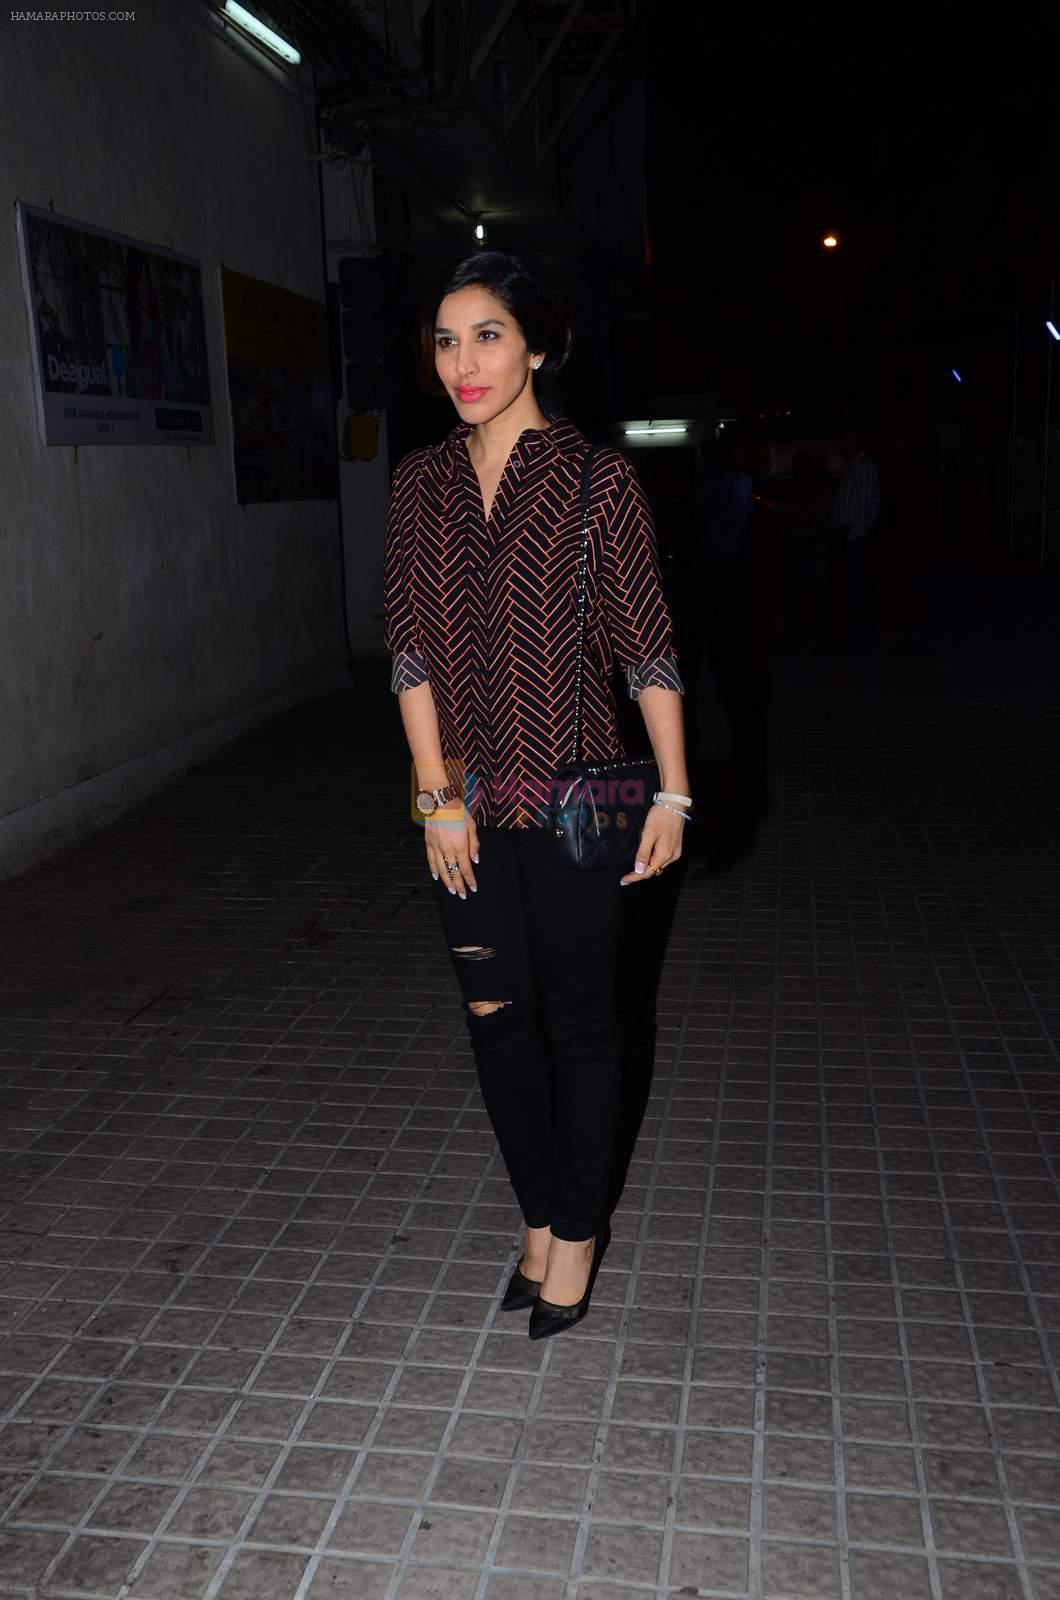 Sophie Chaudhary at Dilwale screening in PVR Juhu and PVR Andheri on 17th Dec 2015